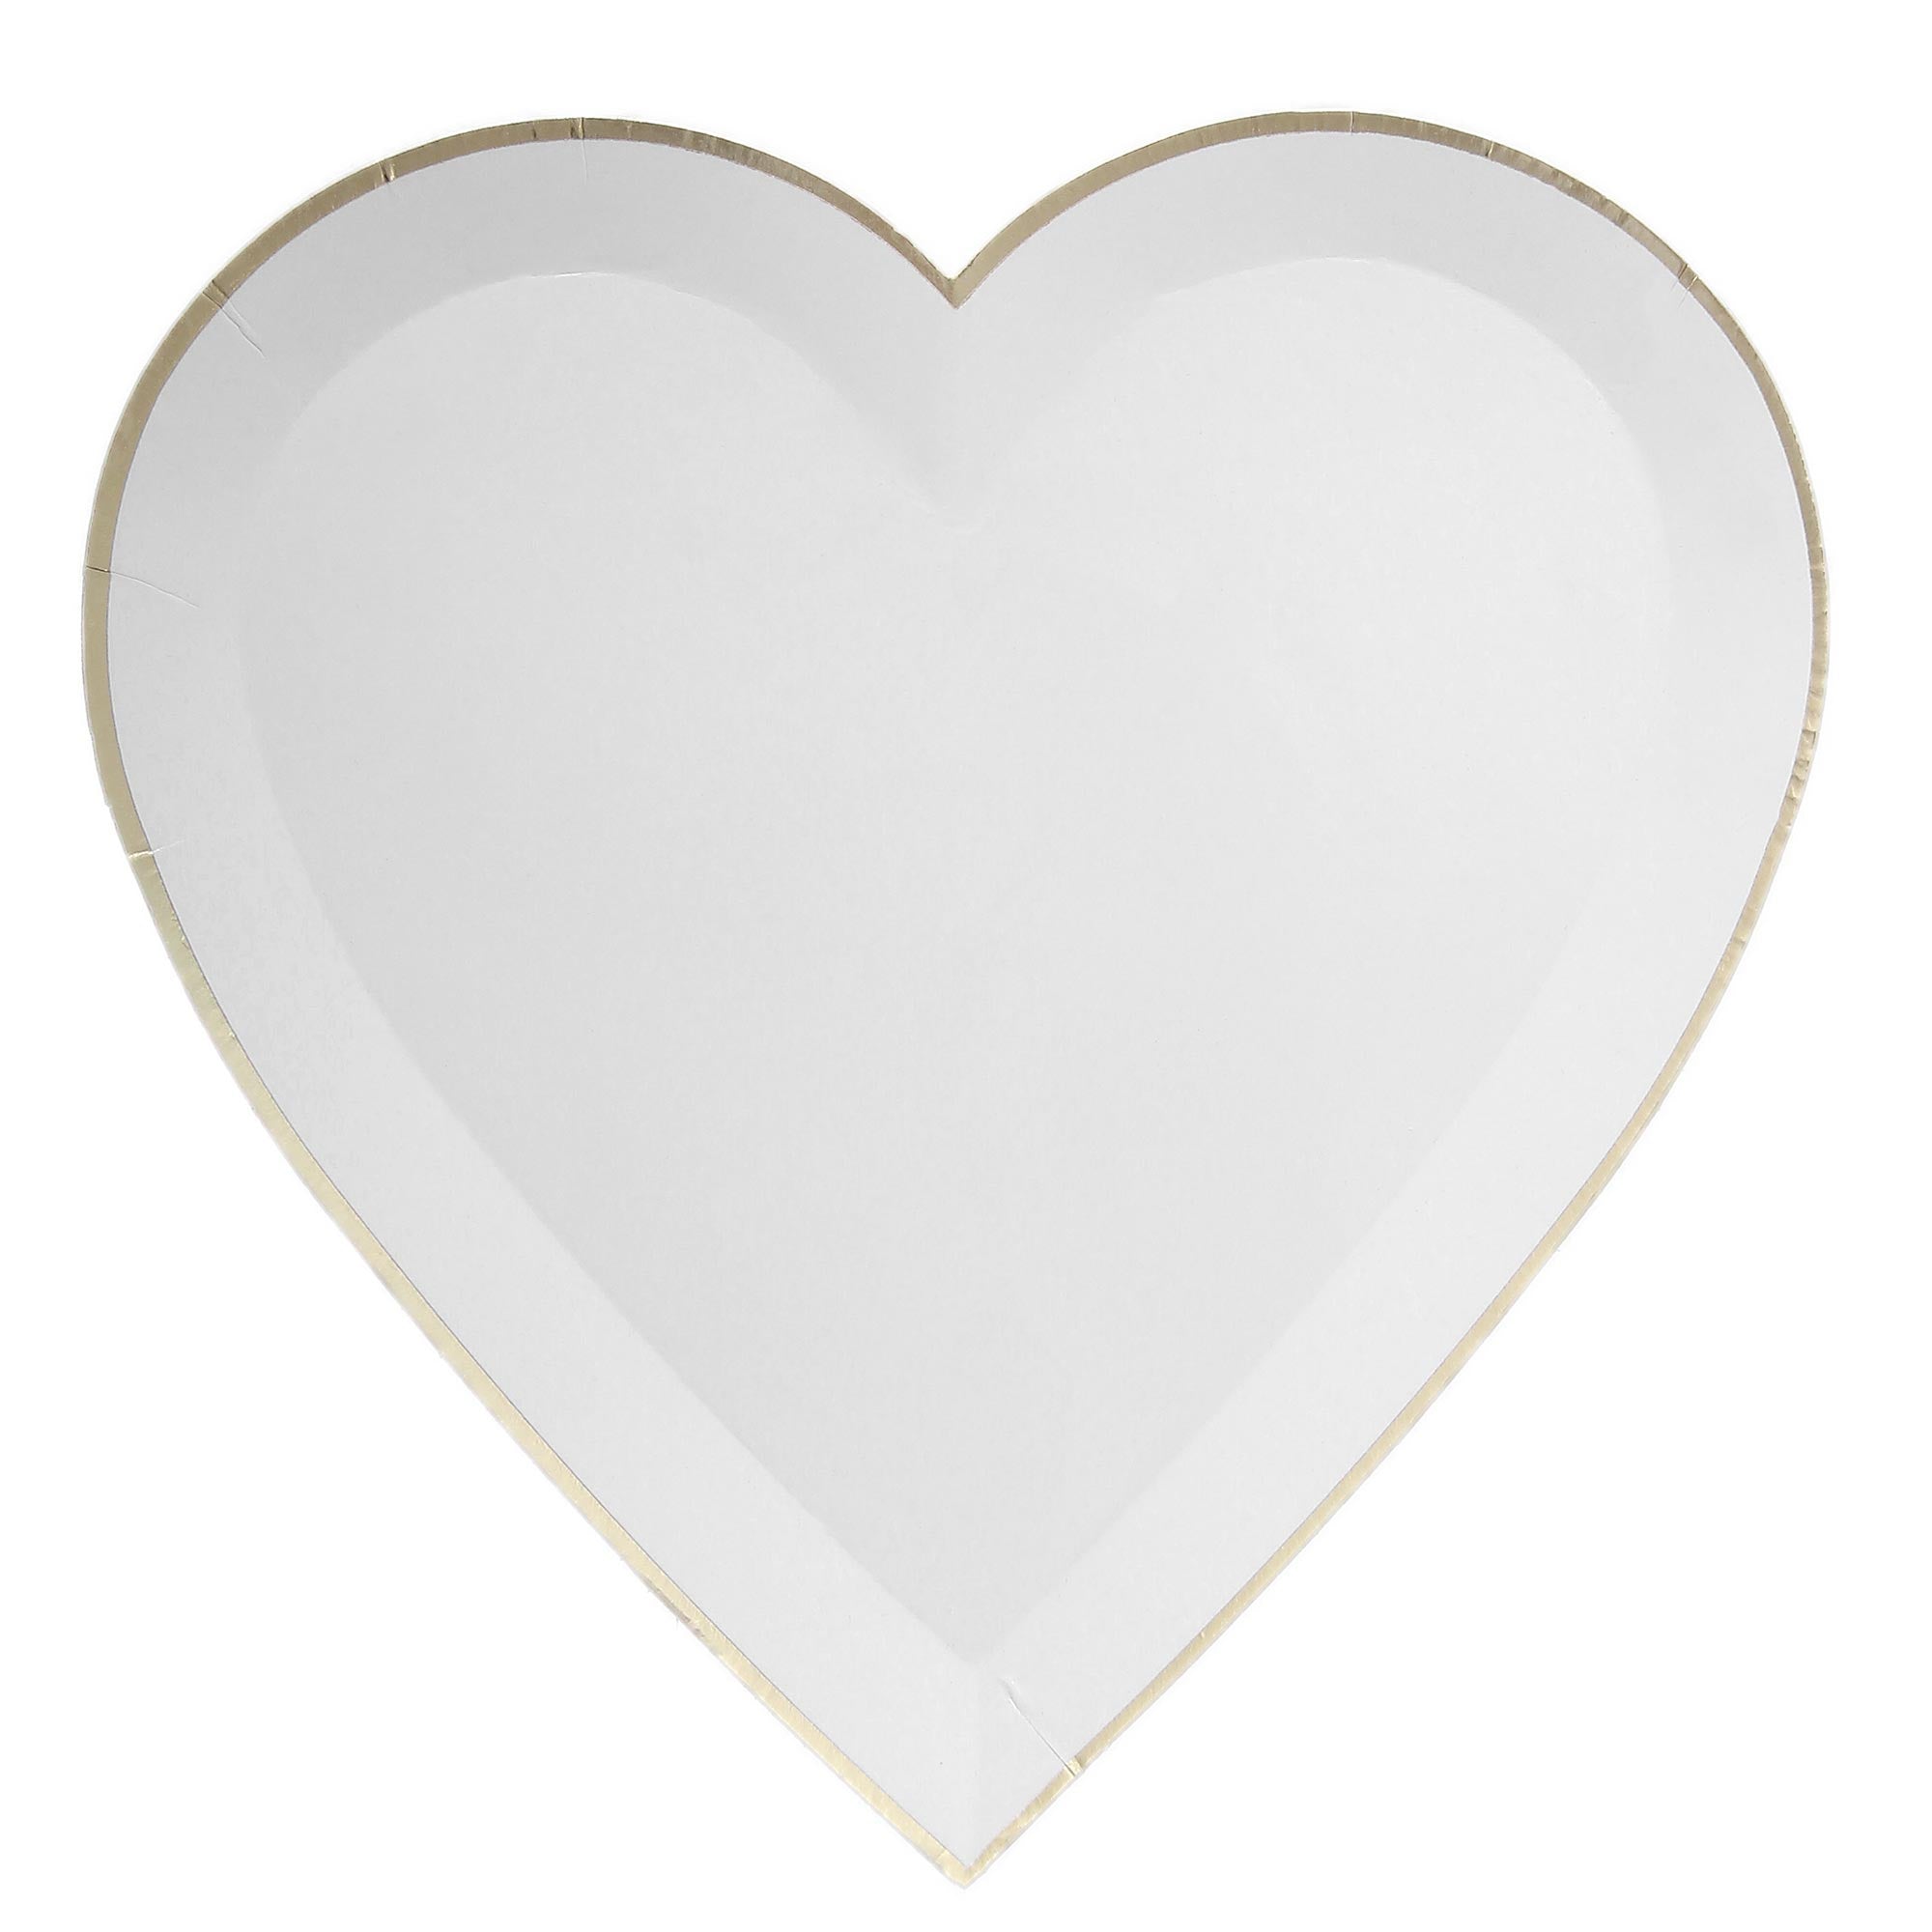 Large Heart Shaped Lunch Paper Plates, White, 9 Inches, 8 Count